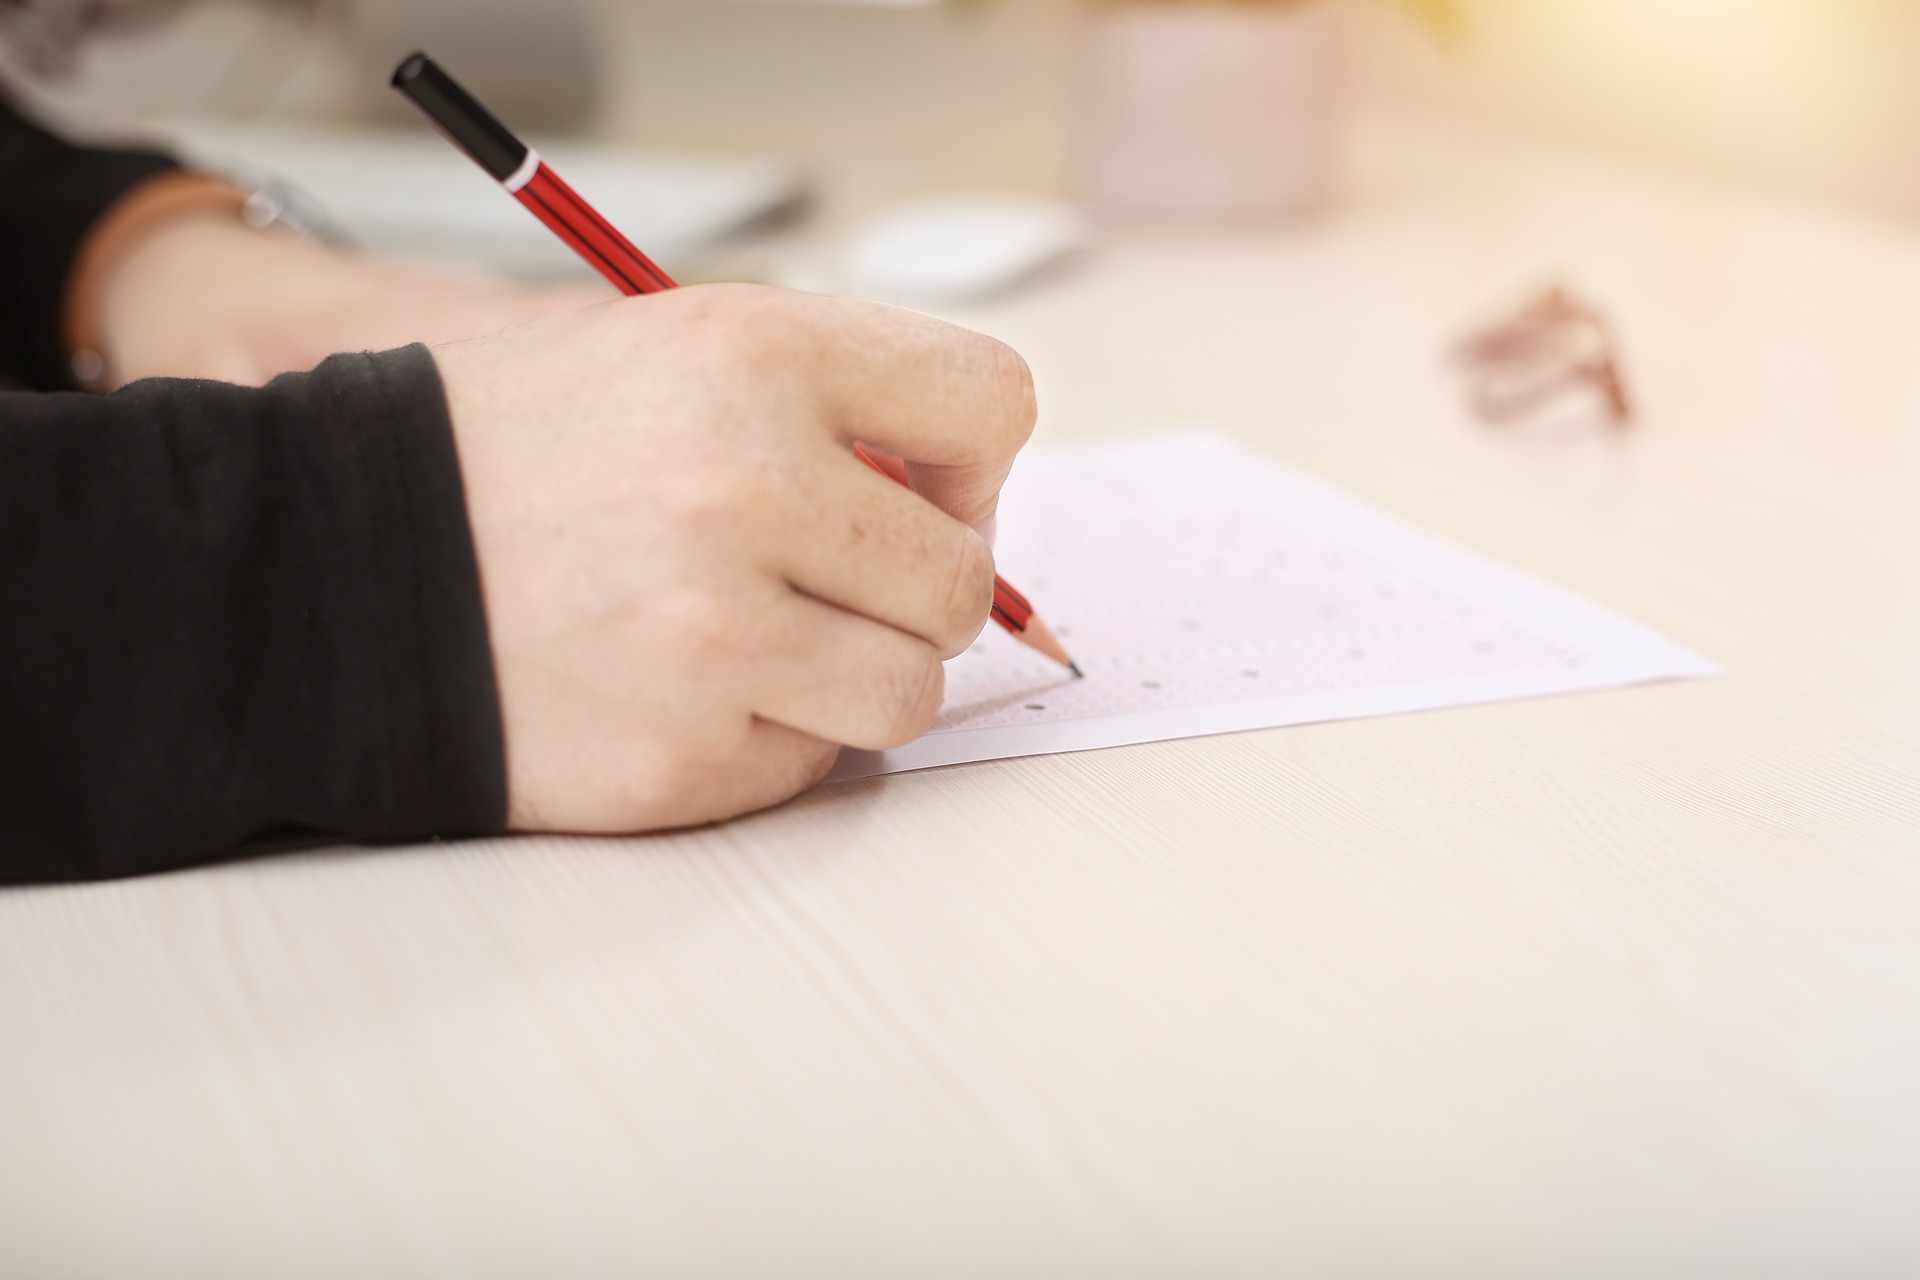 image of someone writing on a piece of paper